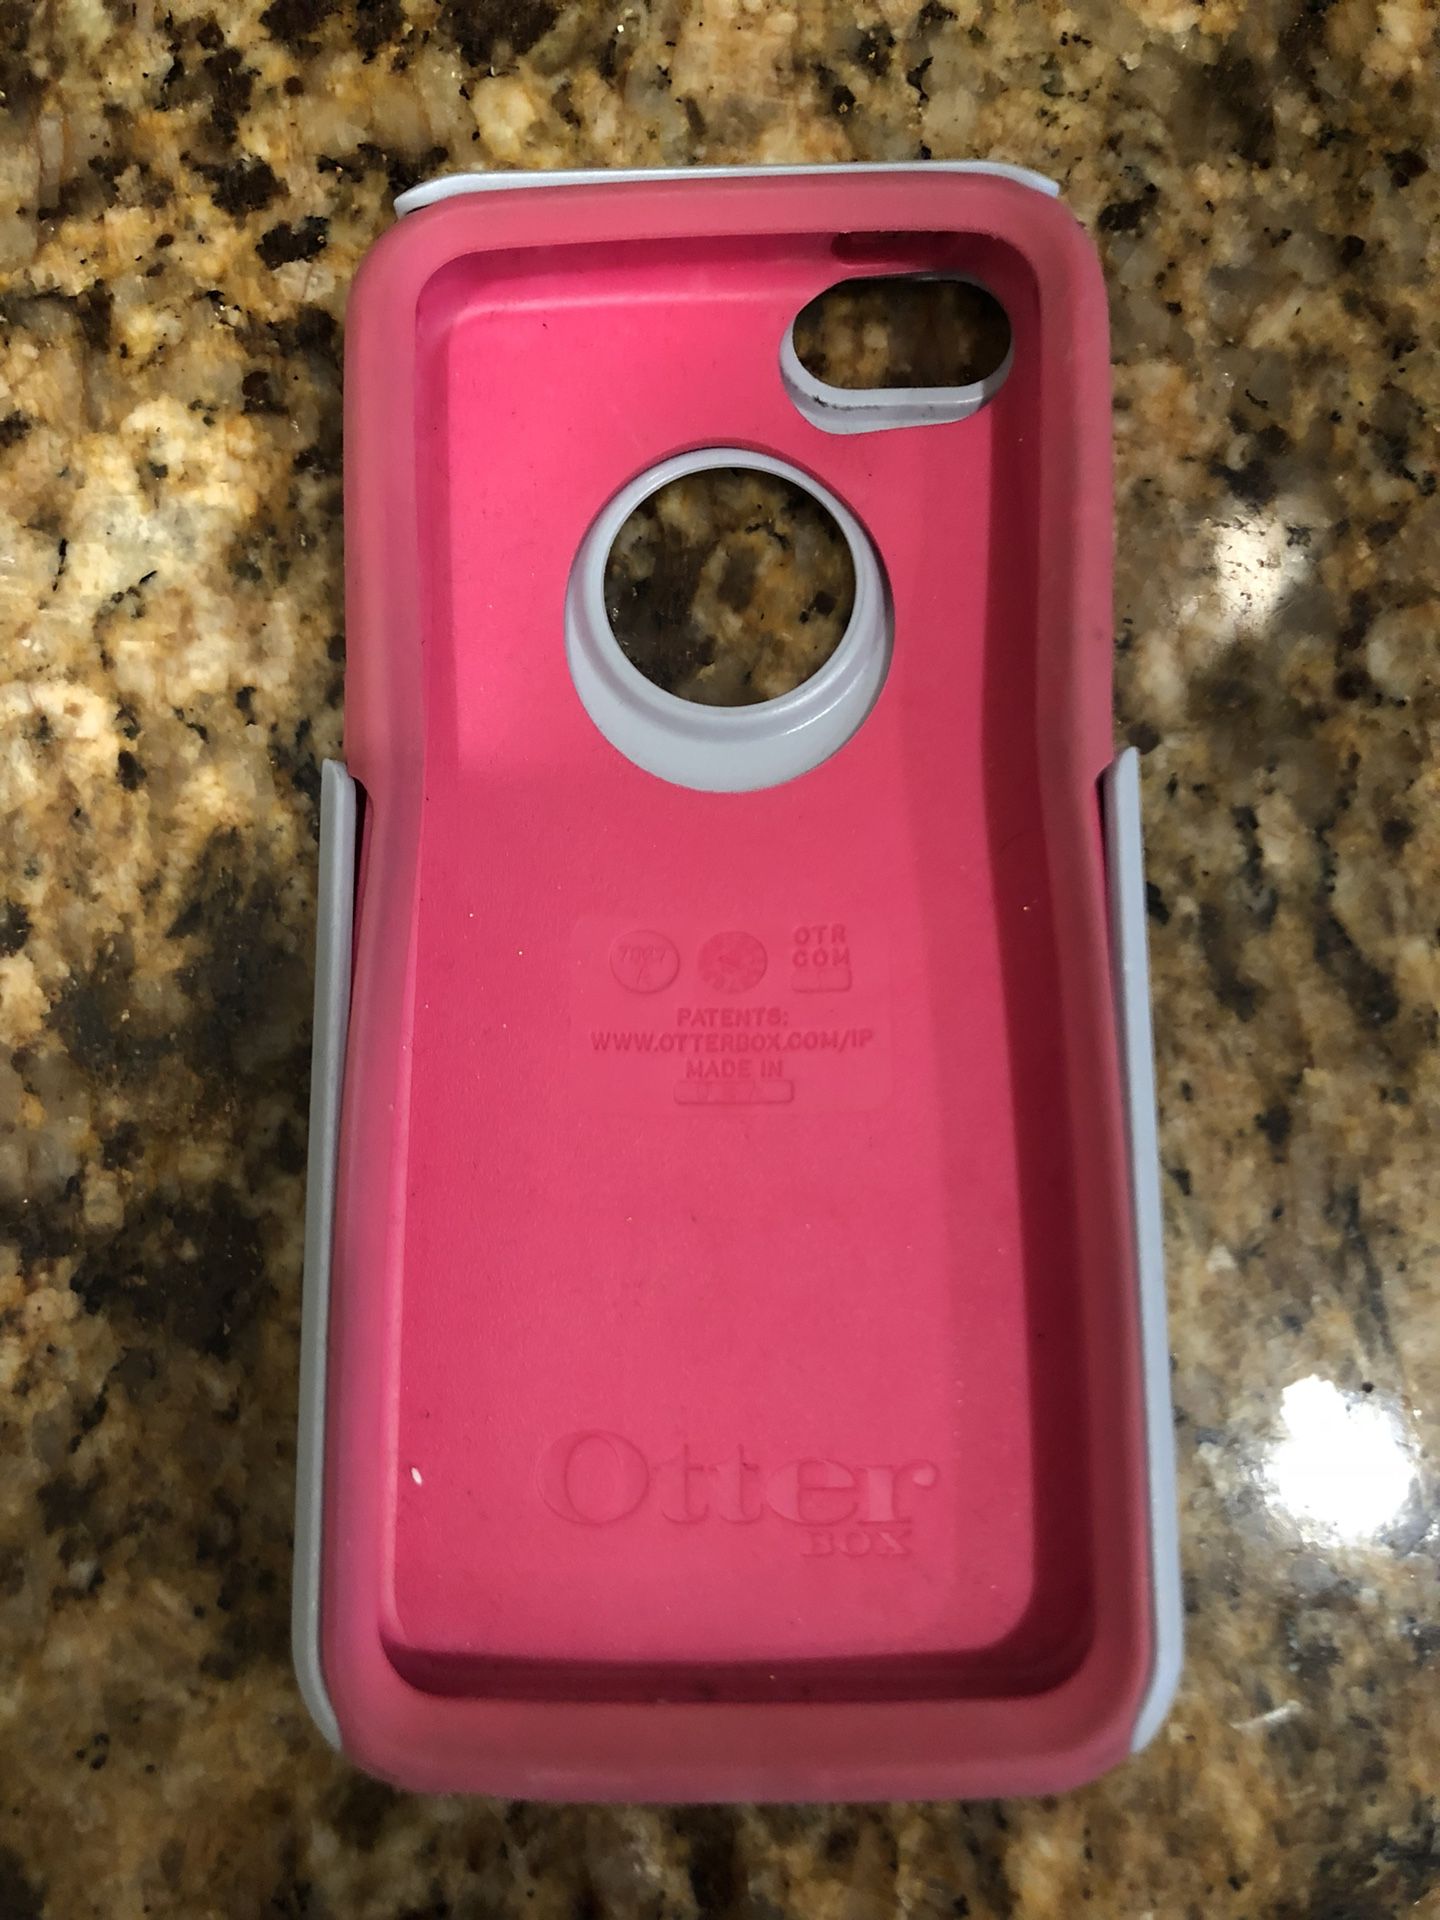 Otterbox for iPhone 5c